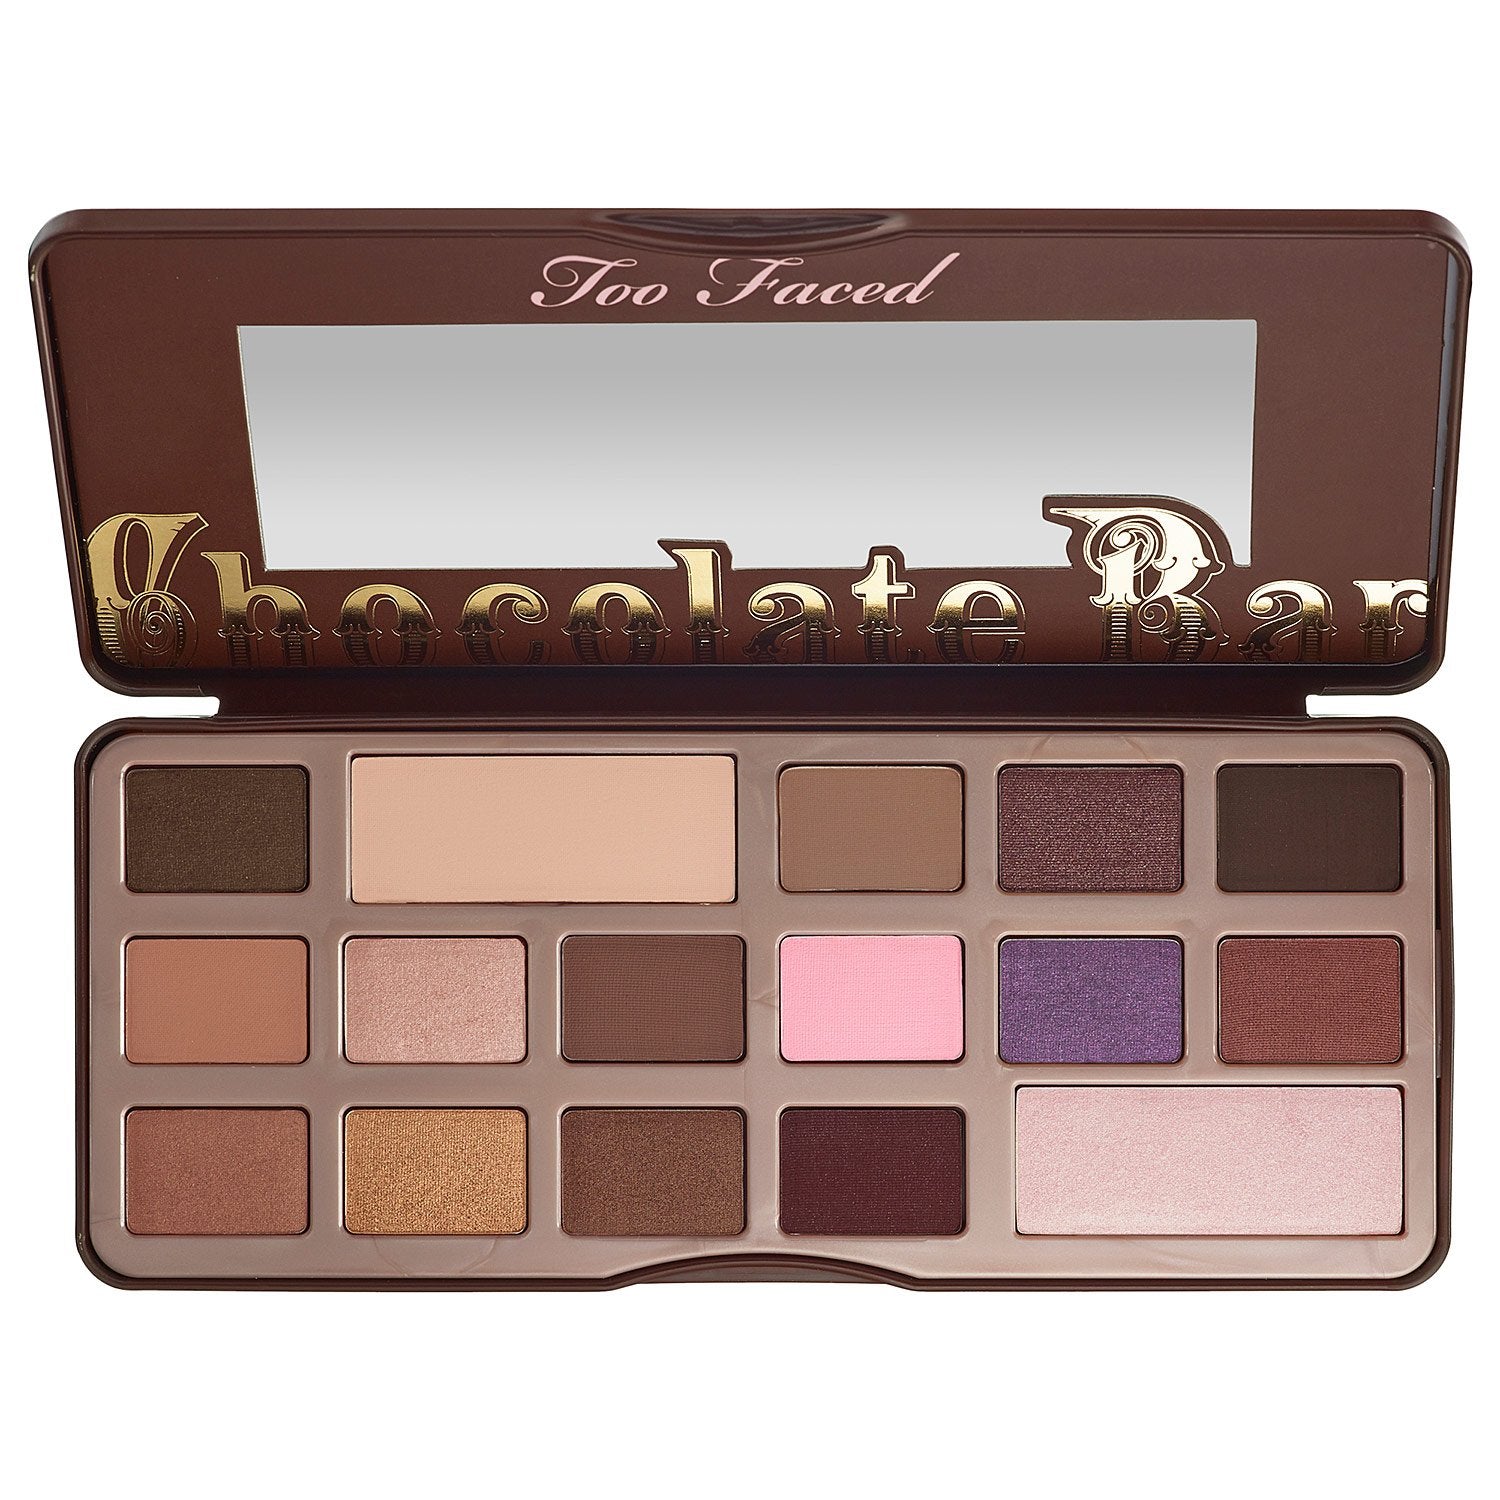 Too Faced Chocolate Palette (4764247818287)